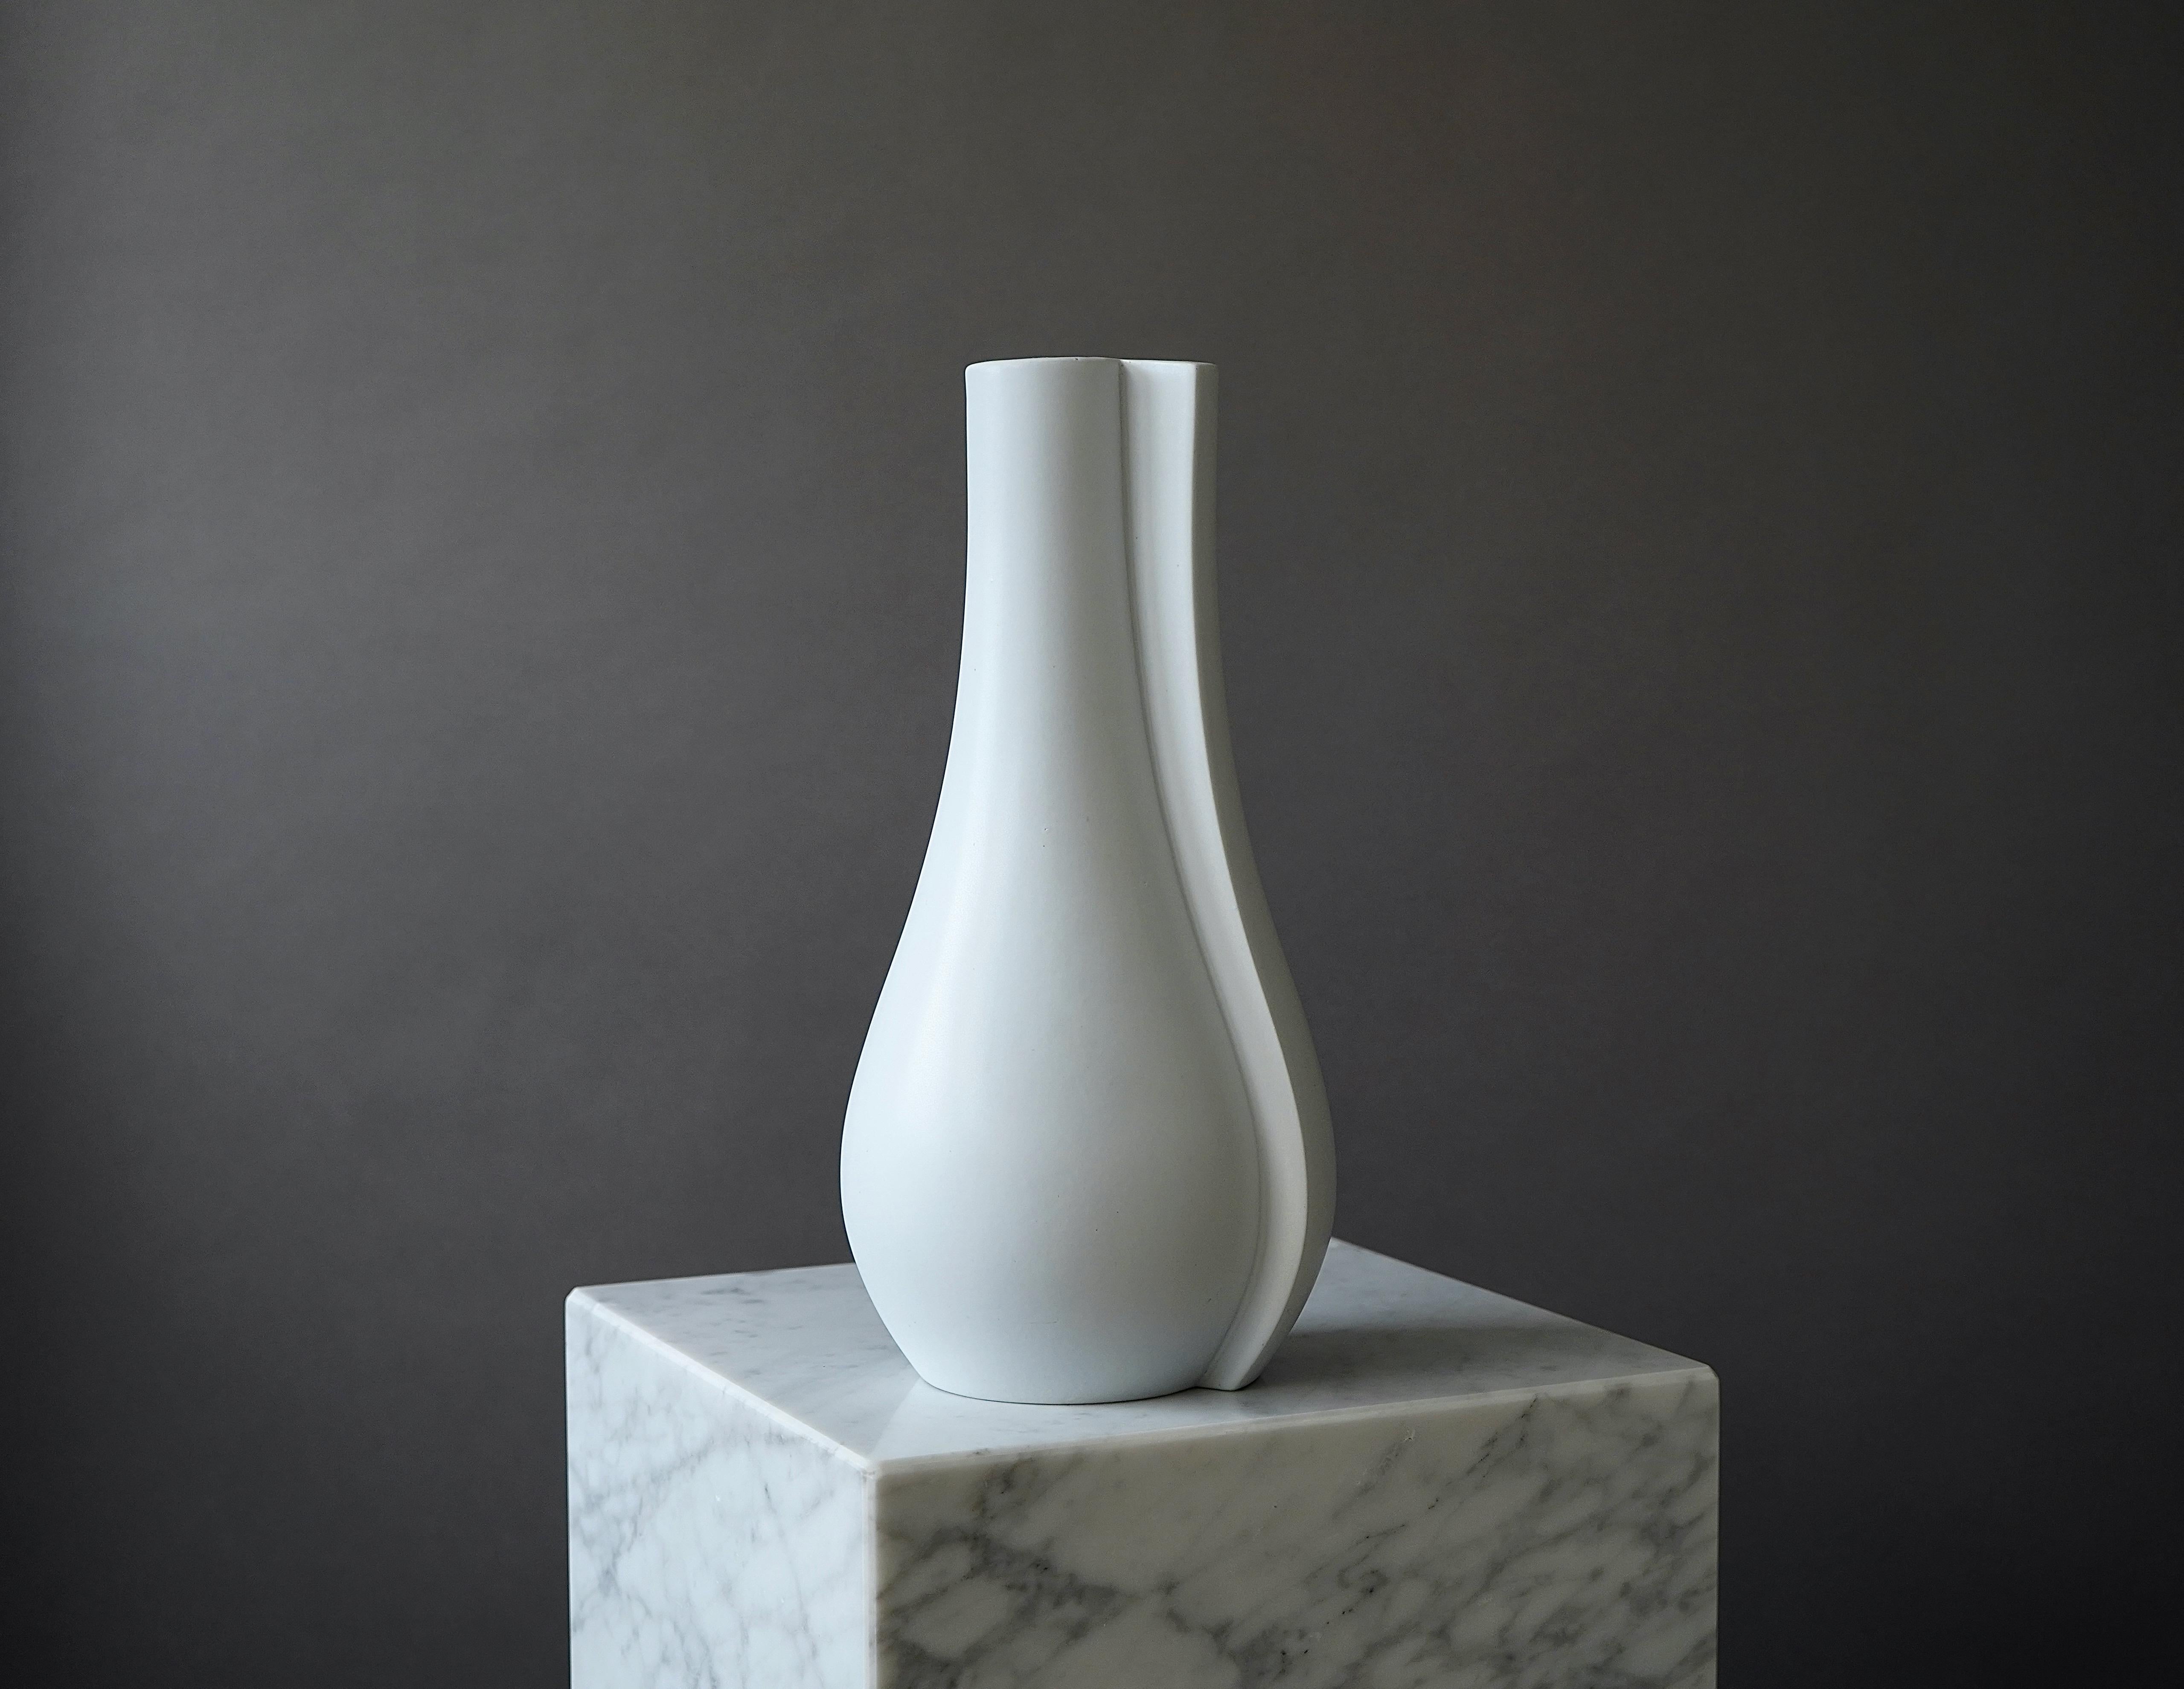 A beautiful 'Surrea' stoneware vase with 'Carrara' glaze. 
Made by Wilhelm Kåge at Gustavsberg in Sweden, 1940s. 
'Swedish Modern'

Excellent condition. 
Stamped 'Gustavsberg Studio / KÅGE / SURREA'.

Wilhelm Kåge was a Swedish artist, painter, and